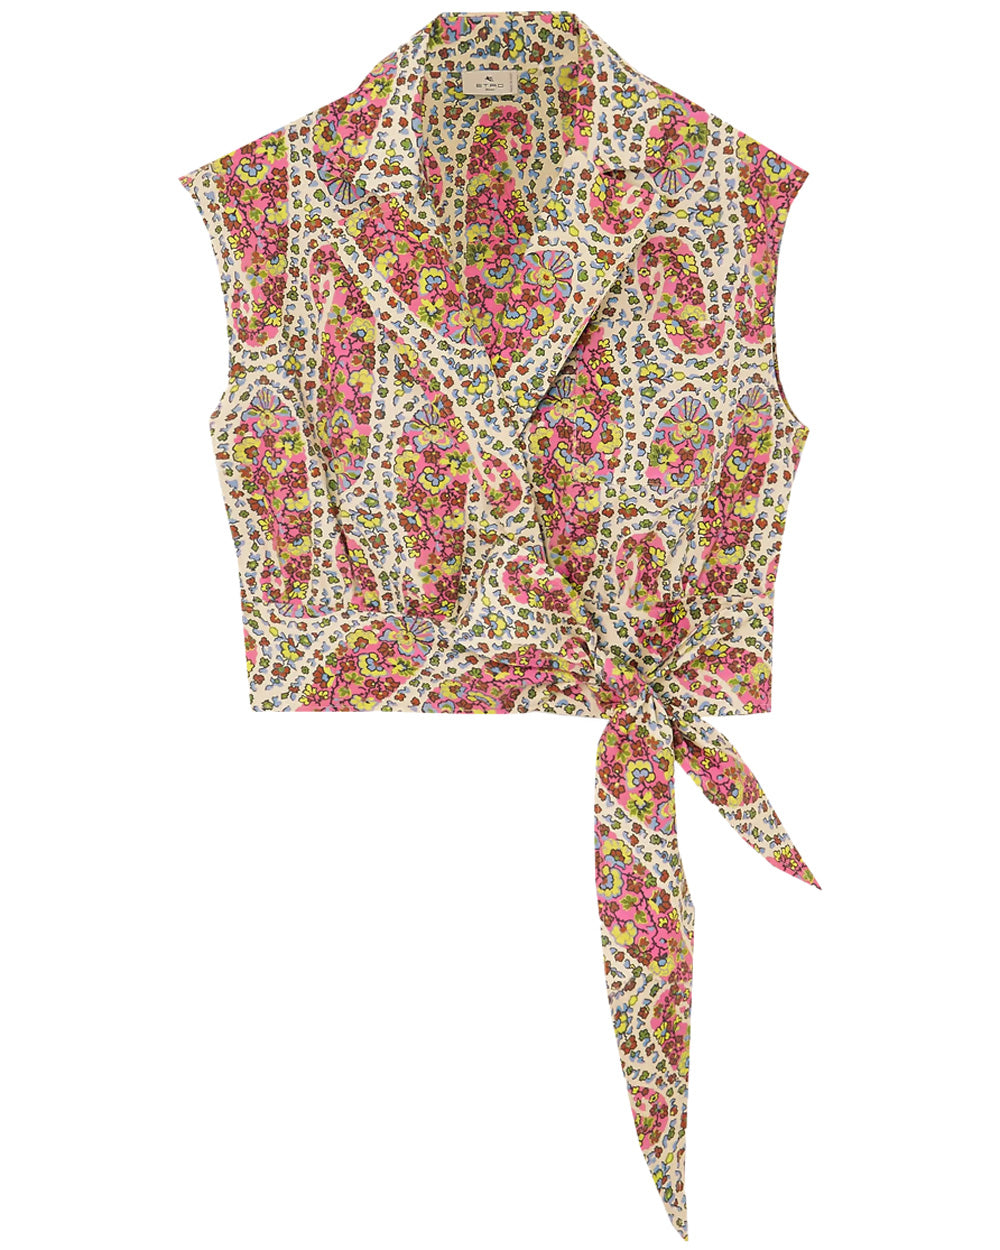 Bright Paisley Print Sleeveless Tie Front Blouse